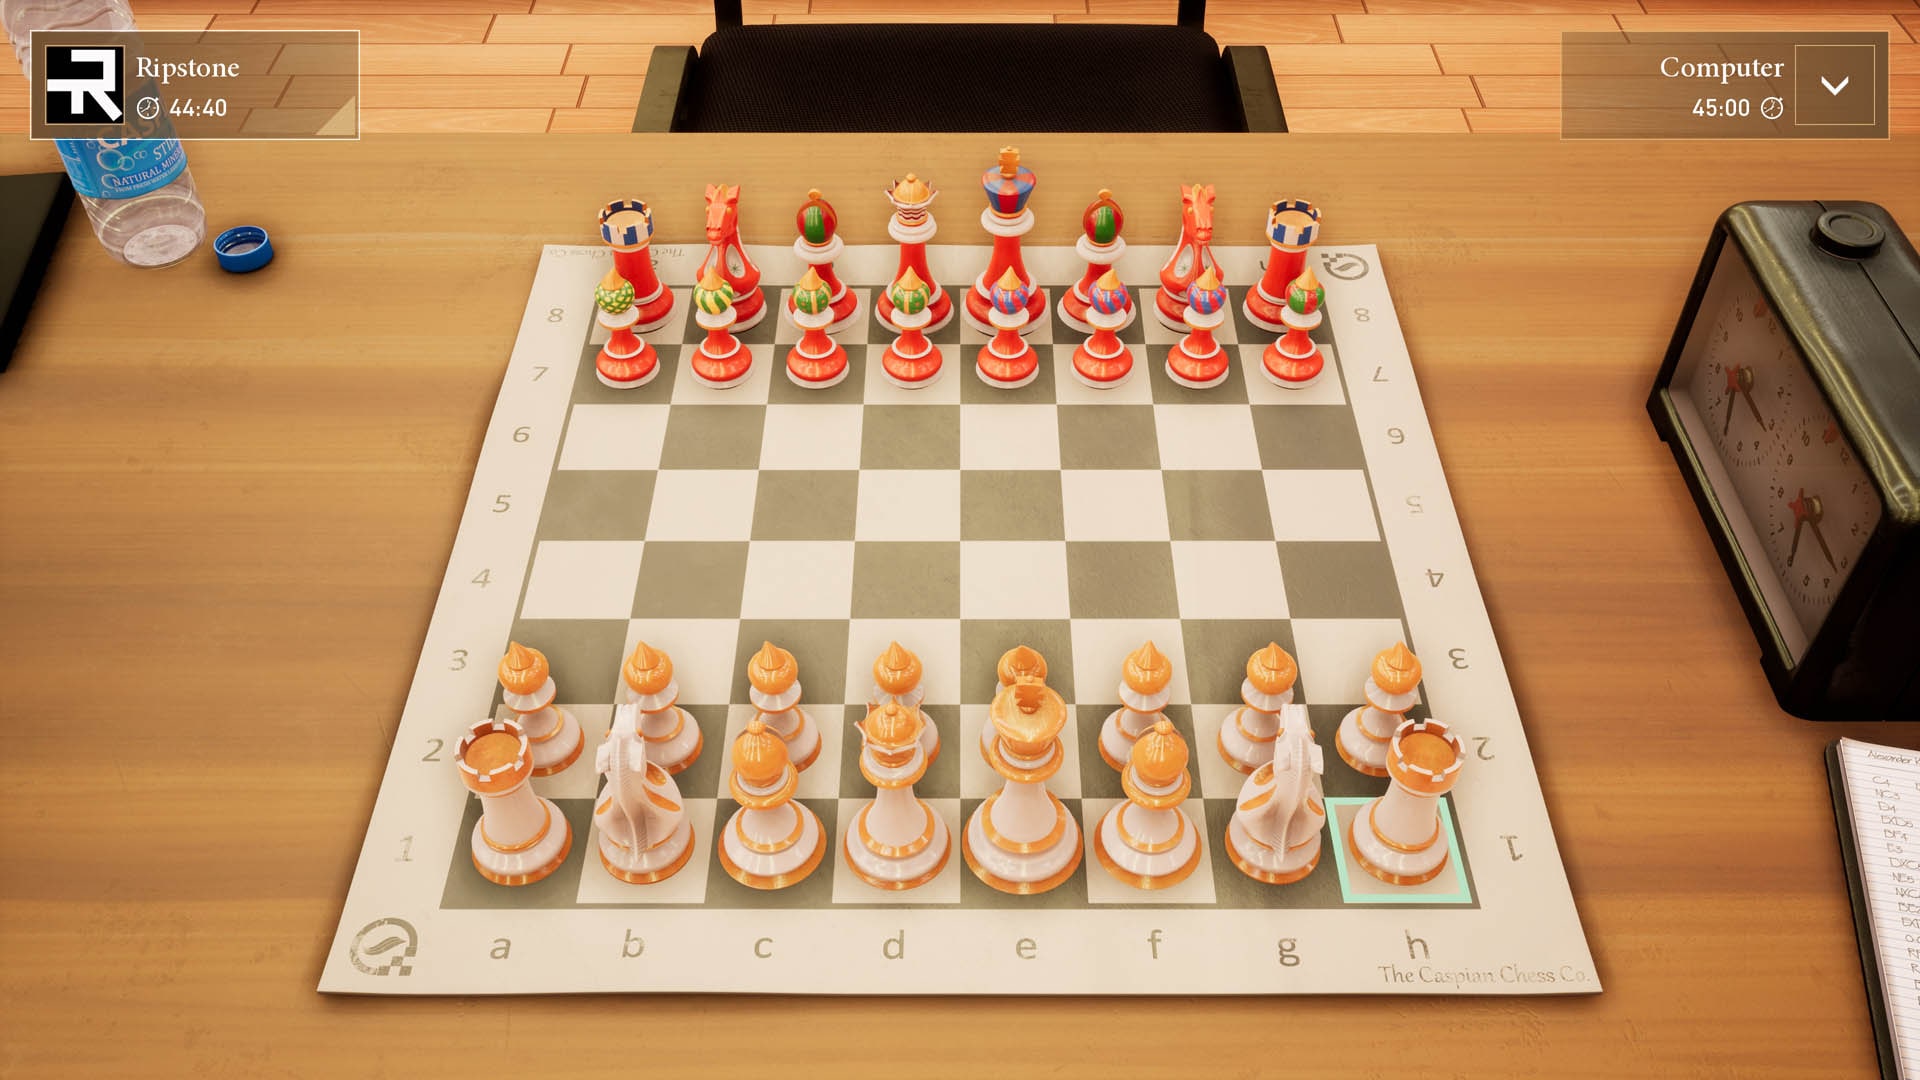 Chess Ultra X Purling London Nette Robinson Art Chess on PS4 — price  history, screenshots, discounts • Iceland